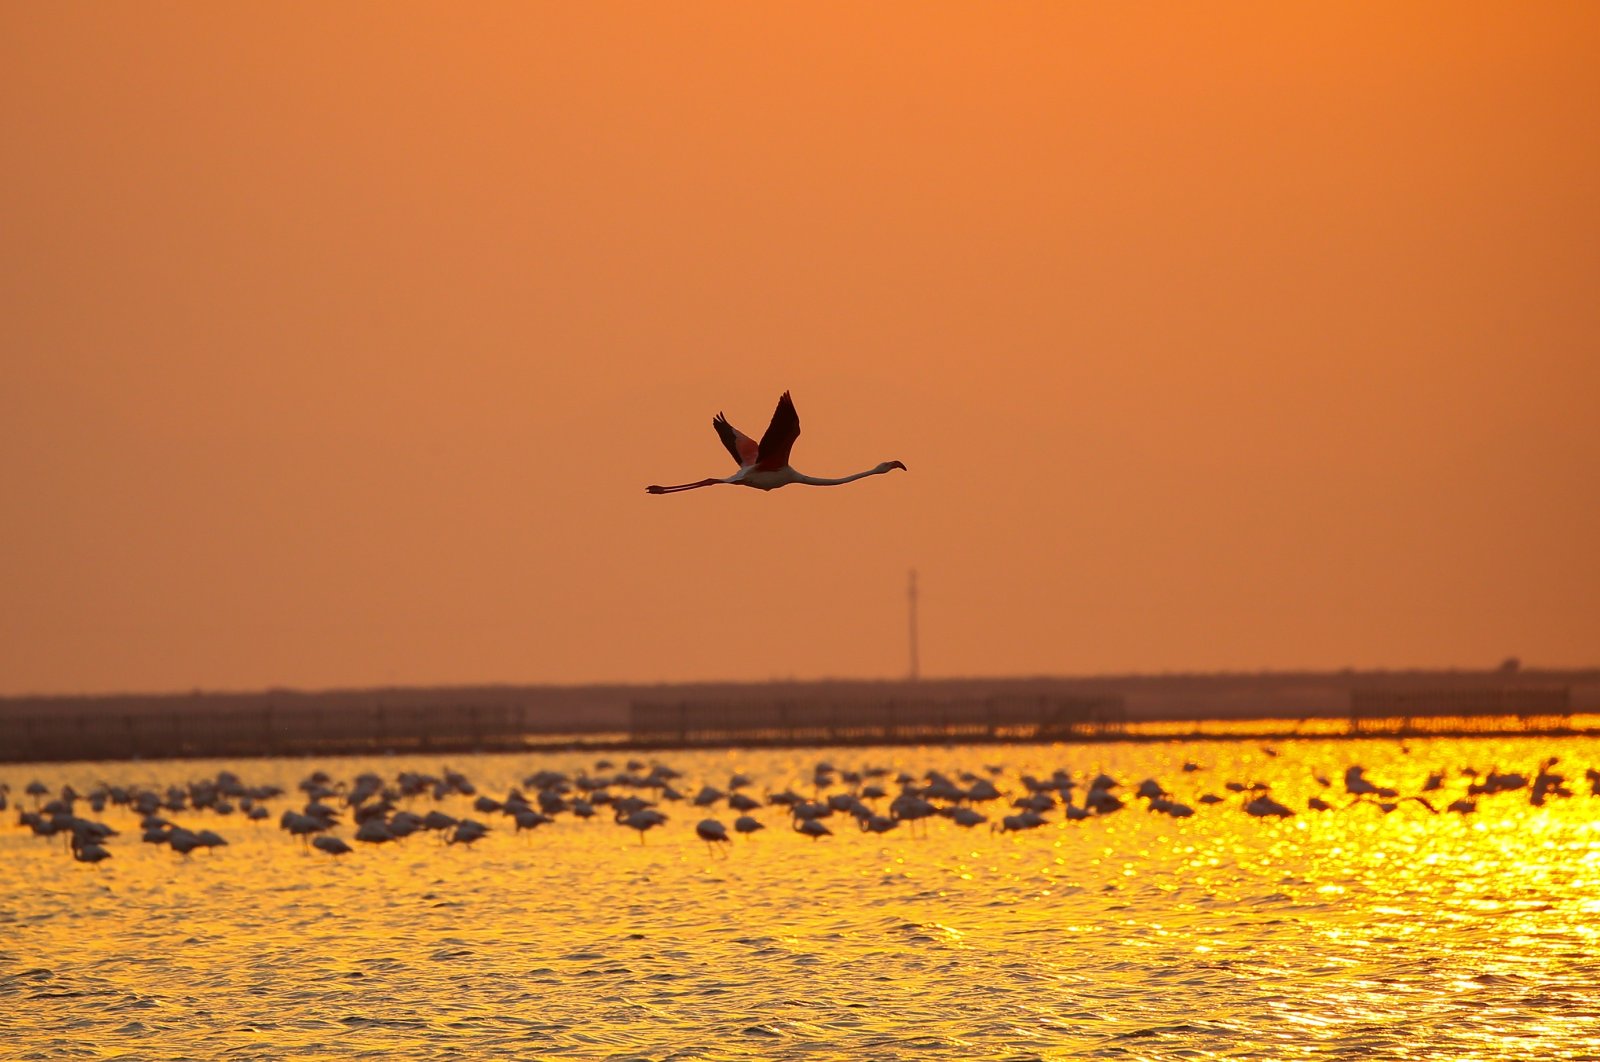 Flamingos dot the sky and surface of the water at sunset in the Gulf of Izmir bird sanctuary, Turkey. (AA Photo)